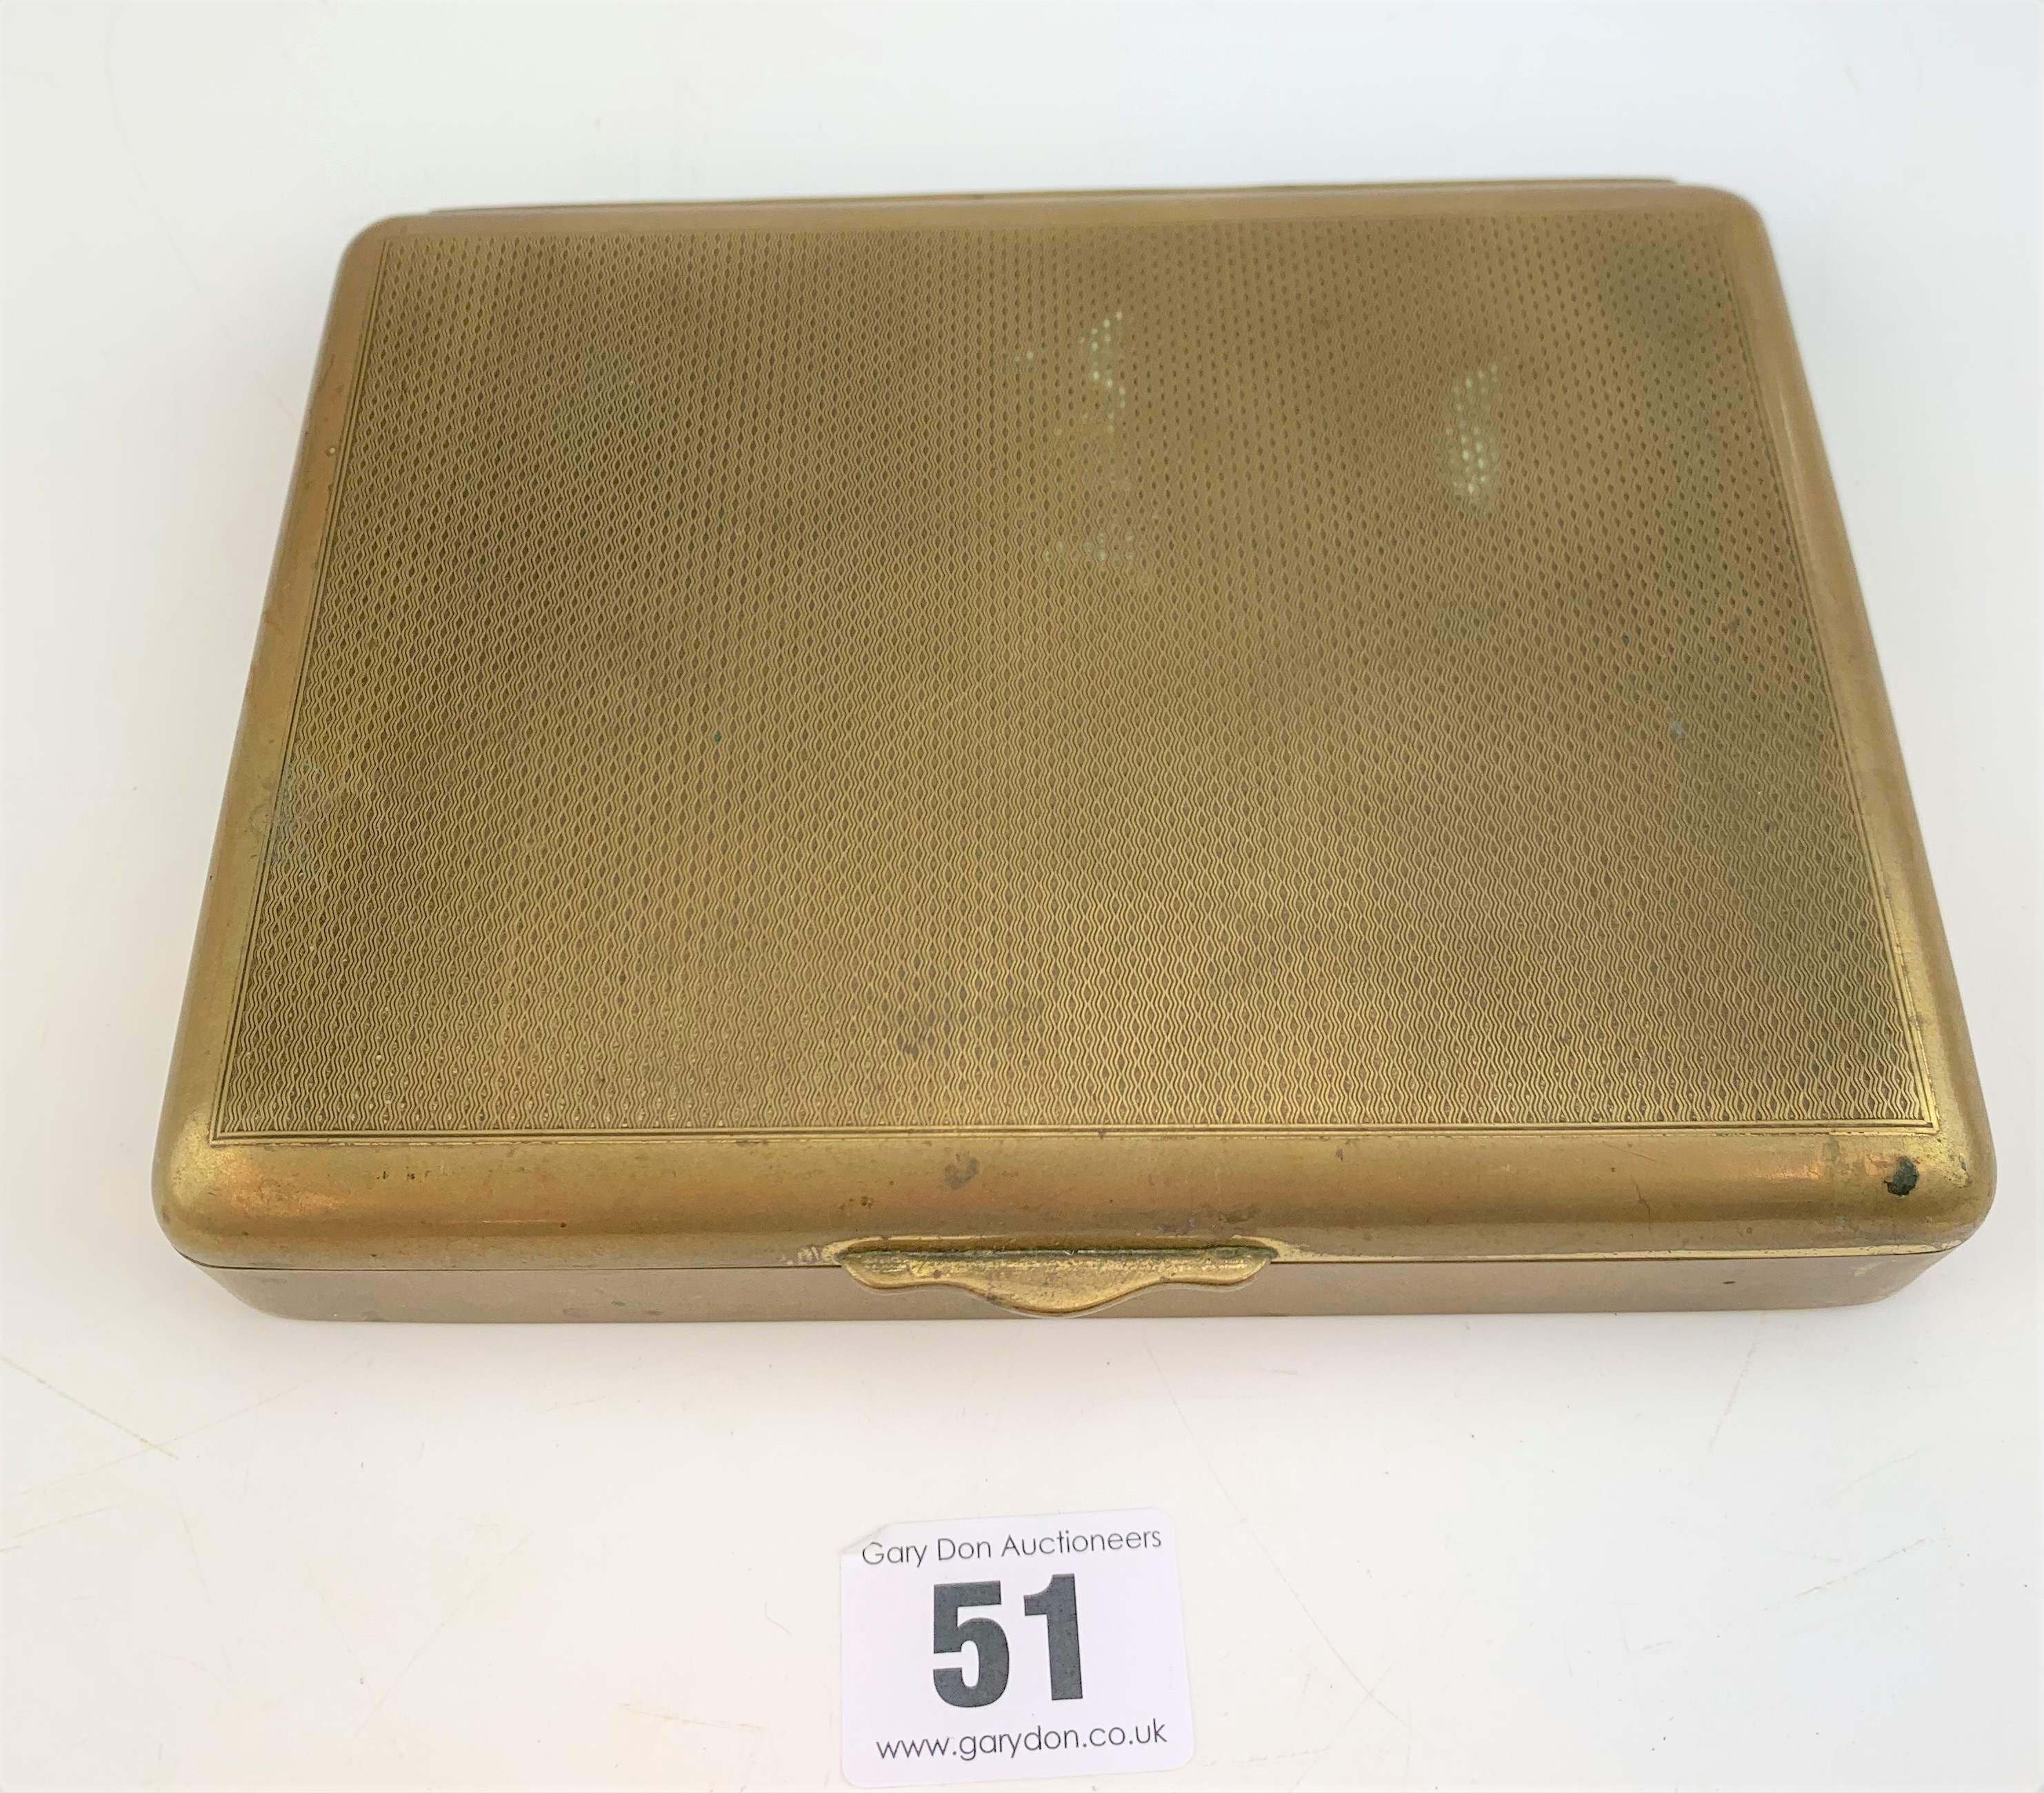 Brass State Express cigarette box - Image 3 of 4